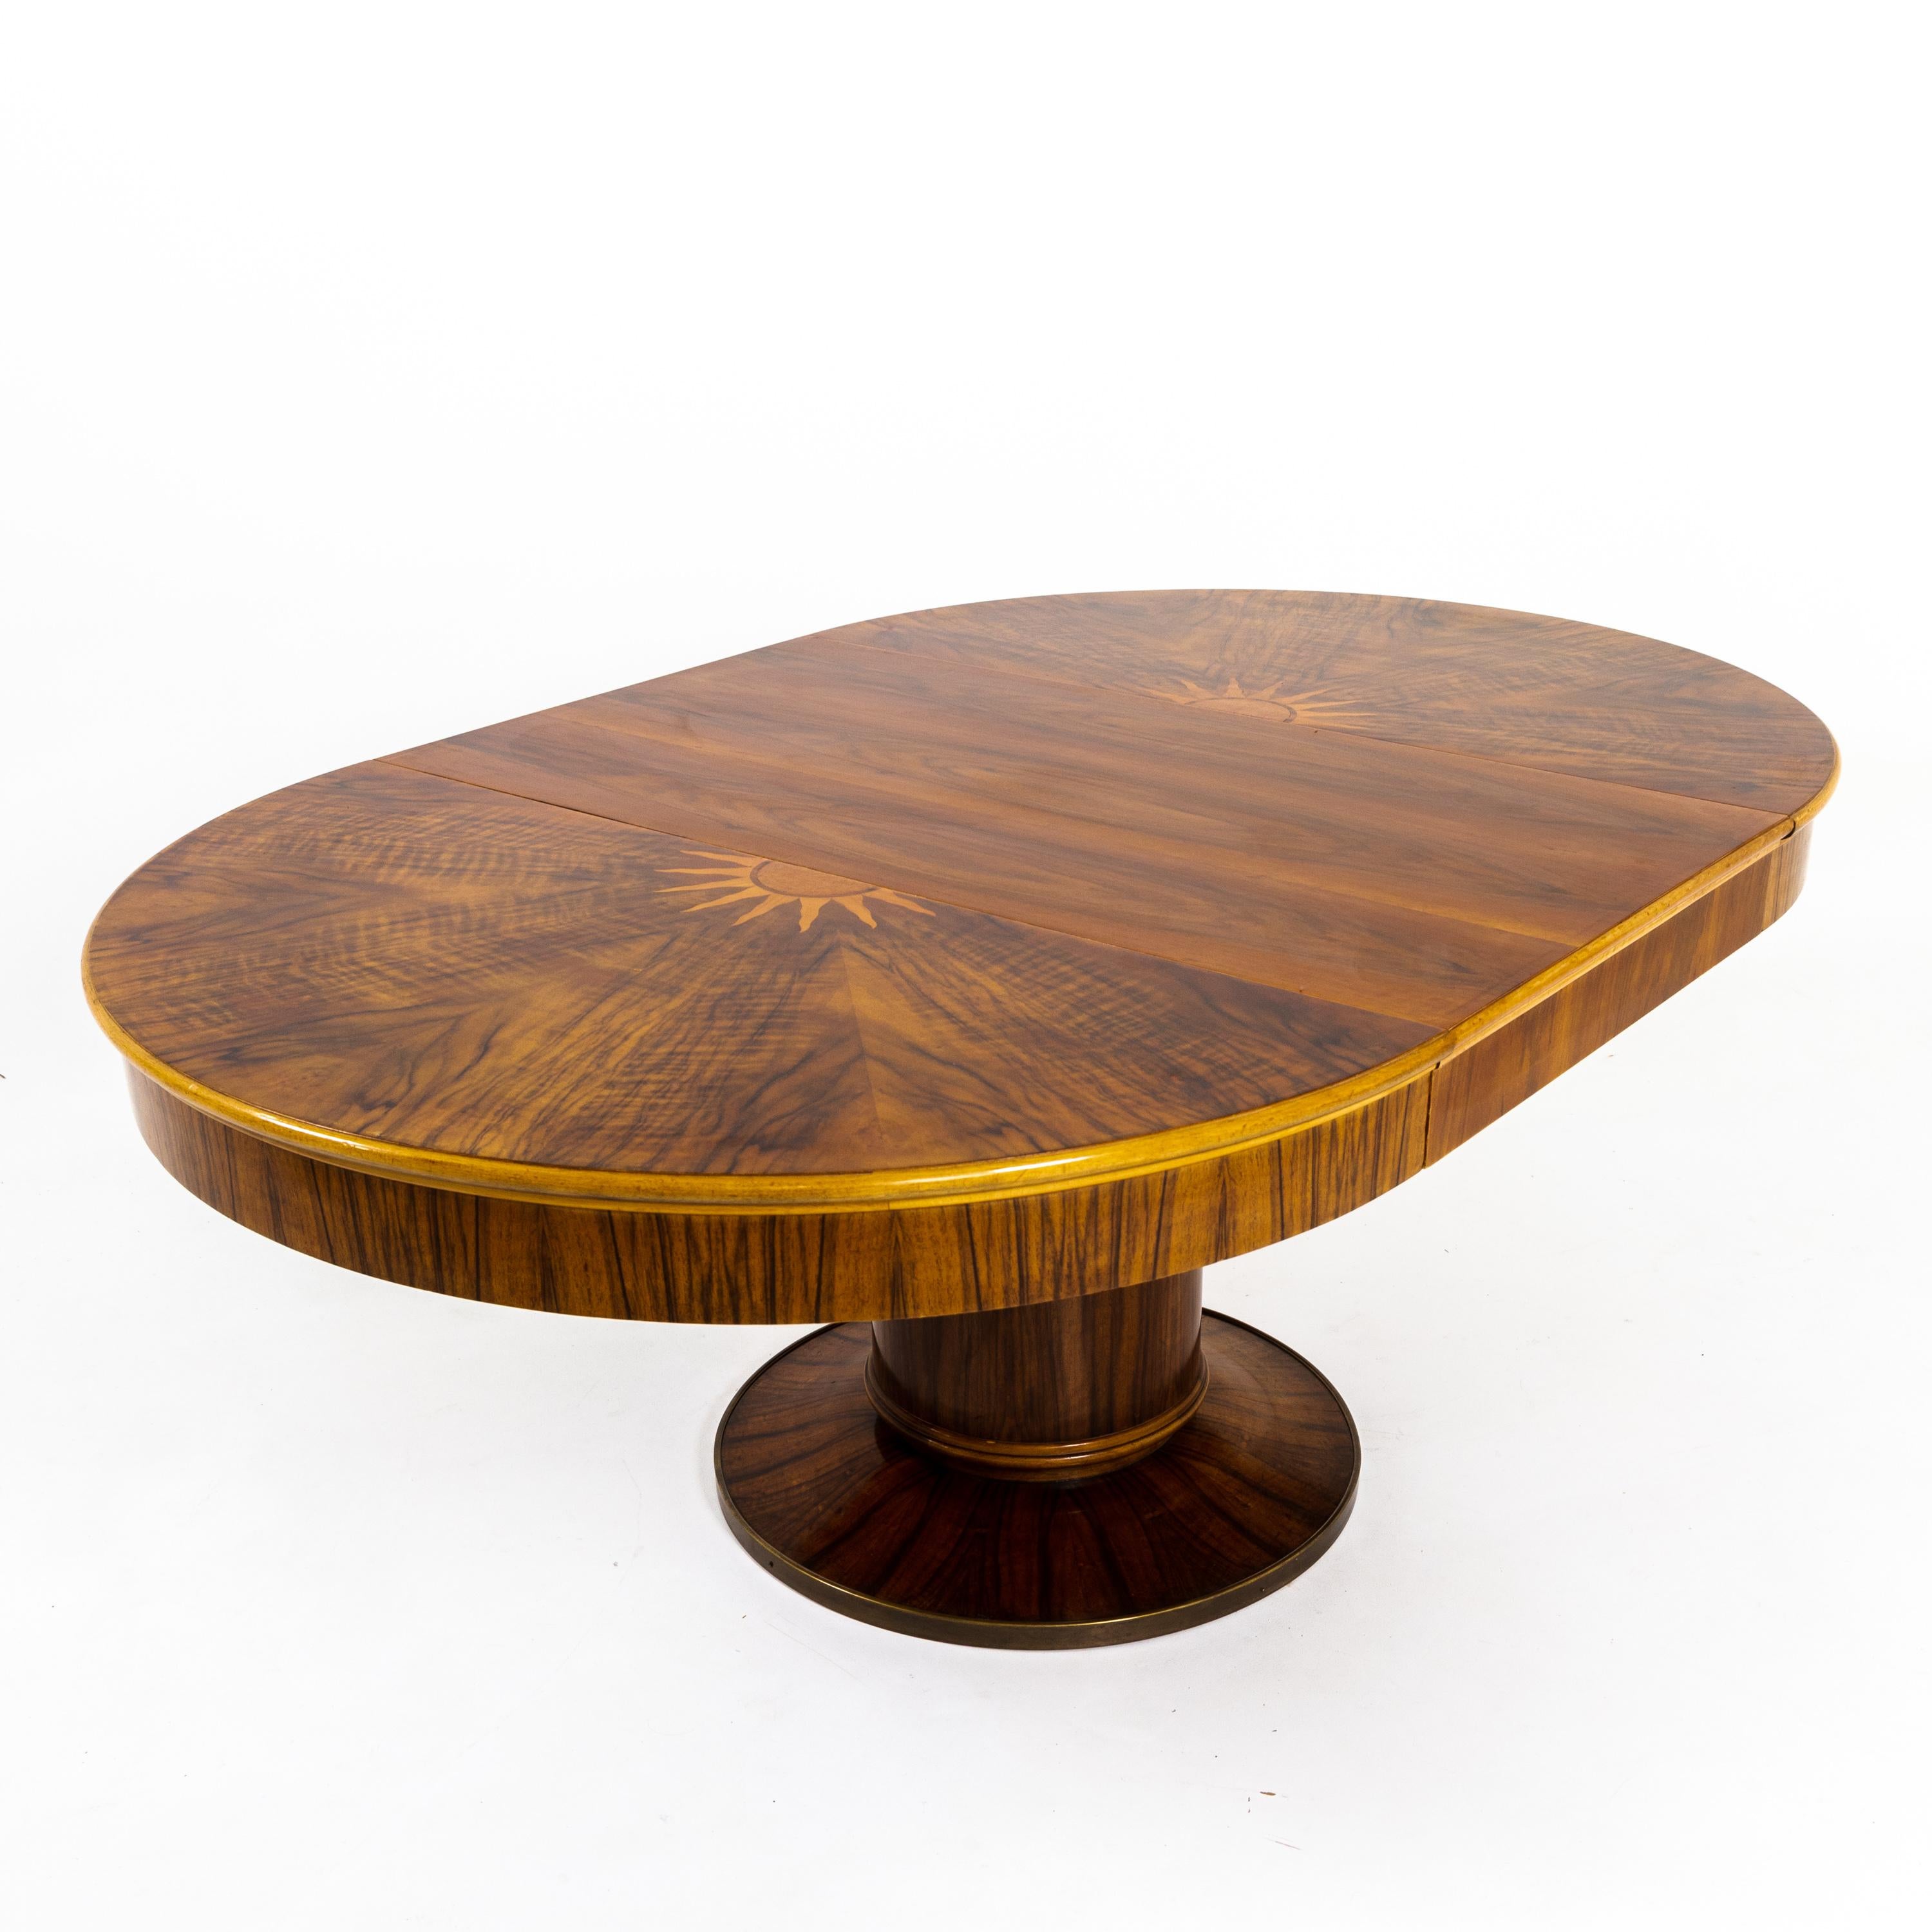 Early 20th Century Art Deco Table, France Around 1920